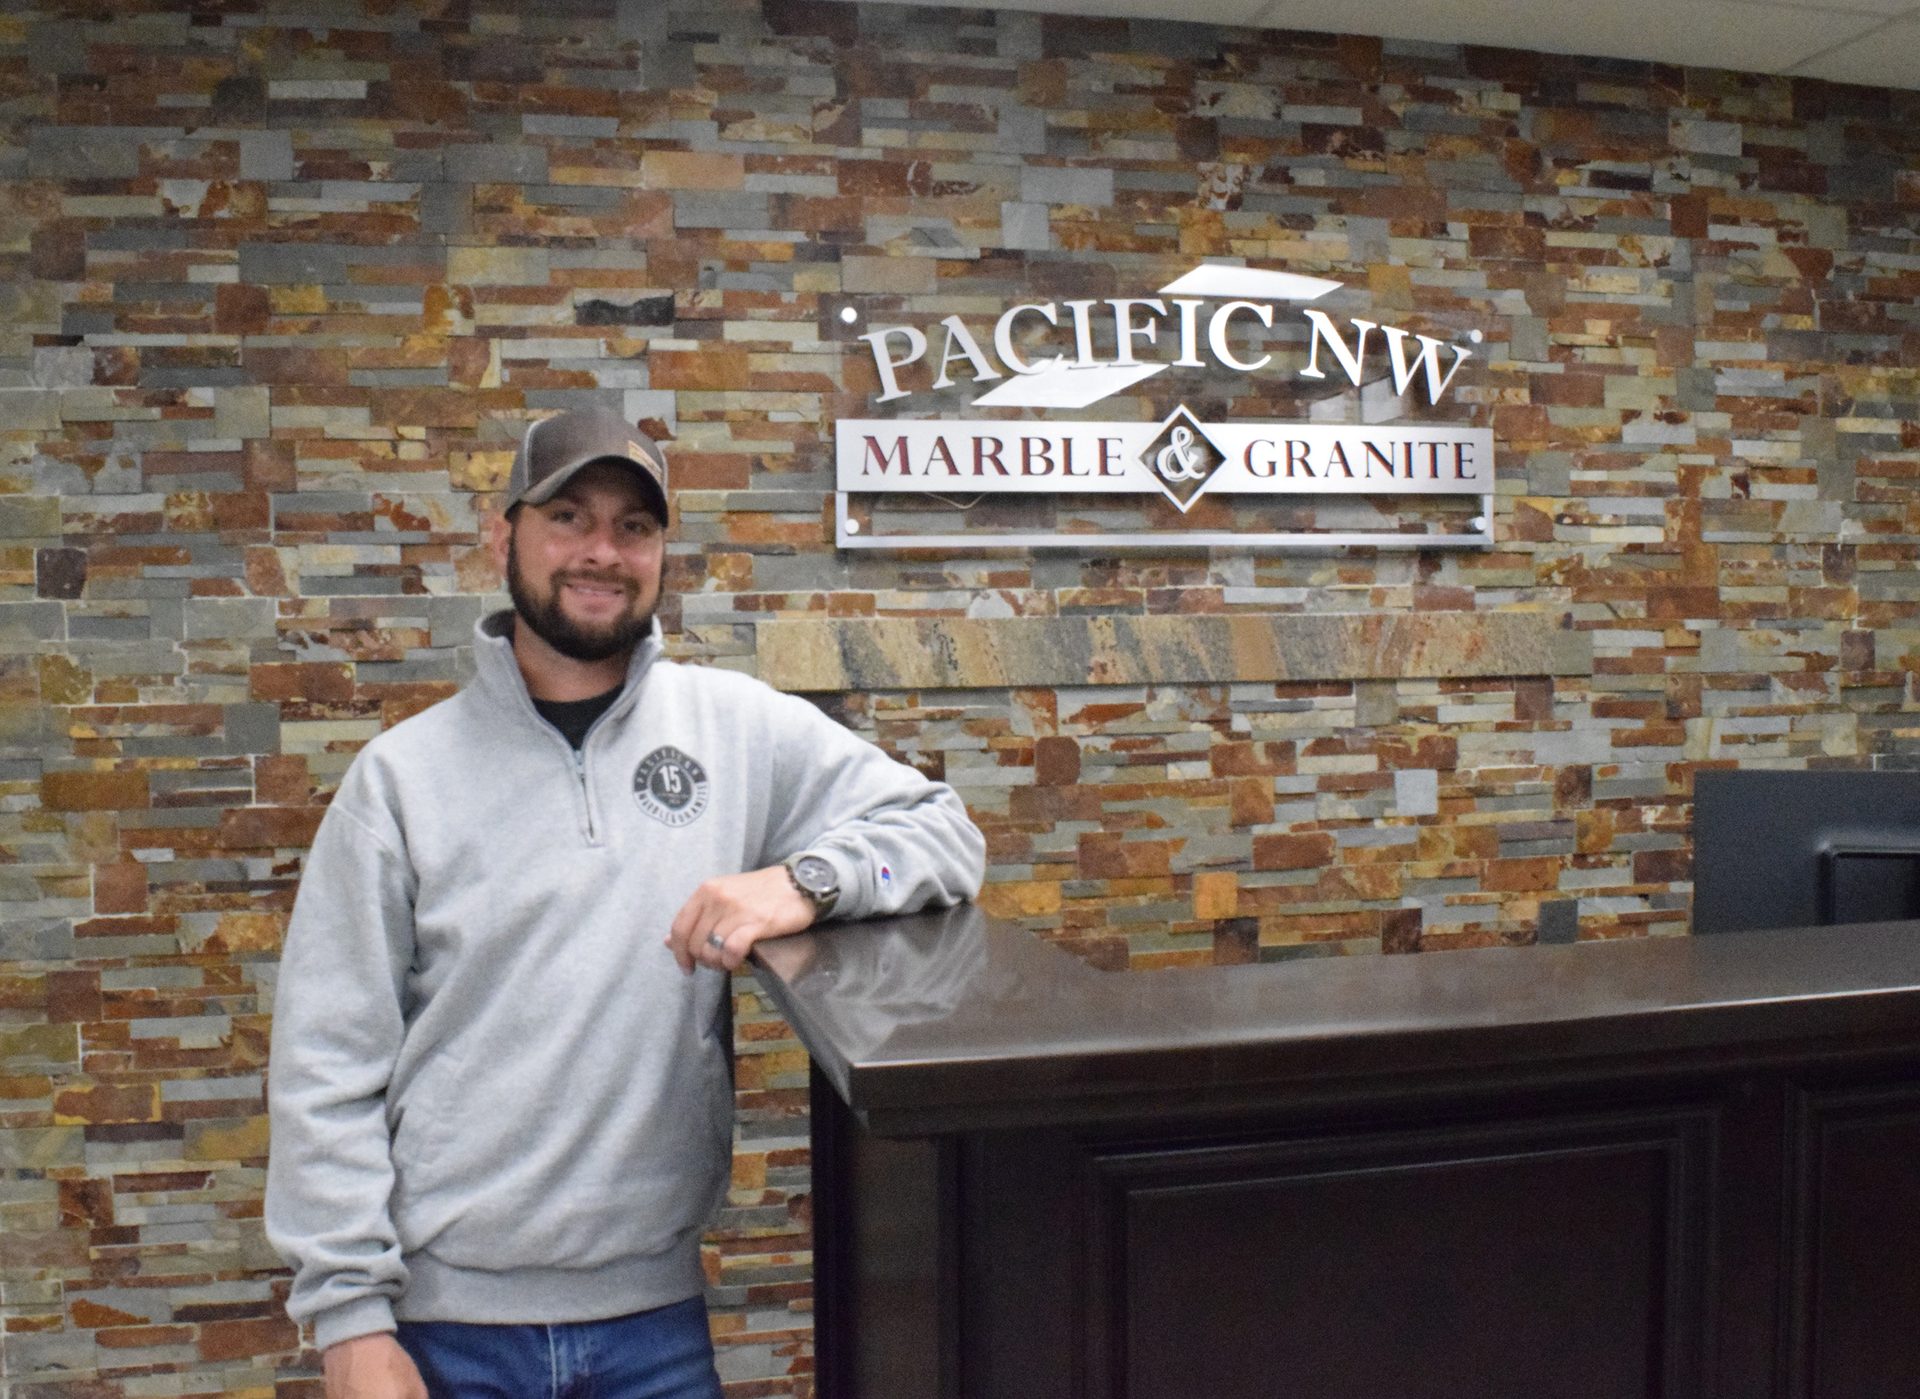 Greg Holland, owner of Pacific NW Marble  Granite in Hubbard, OR